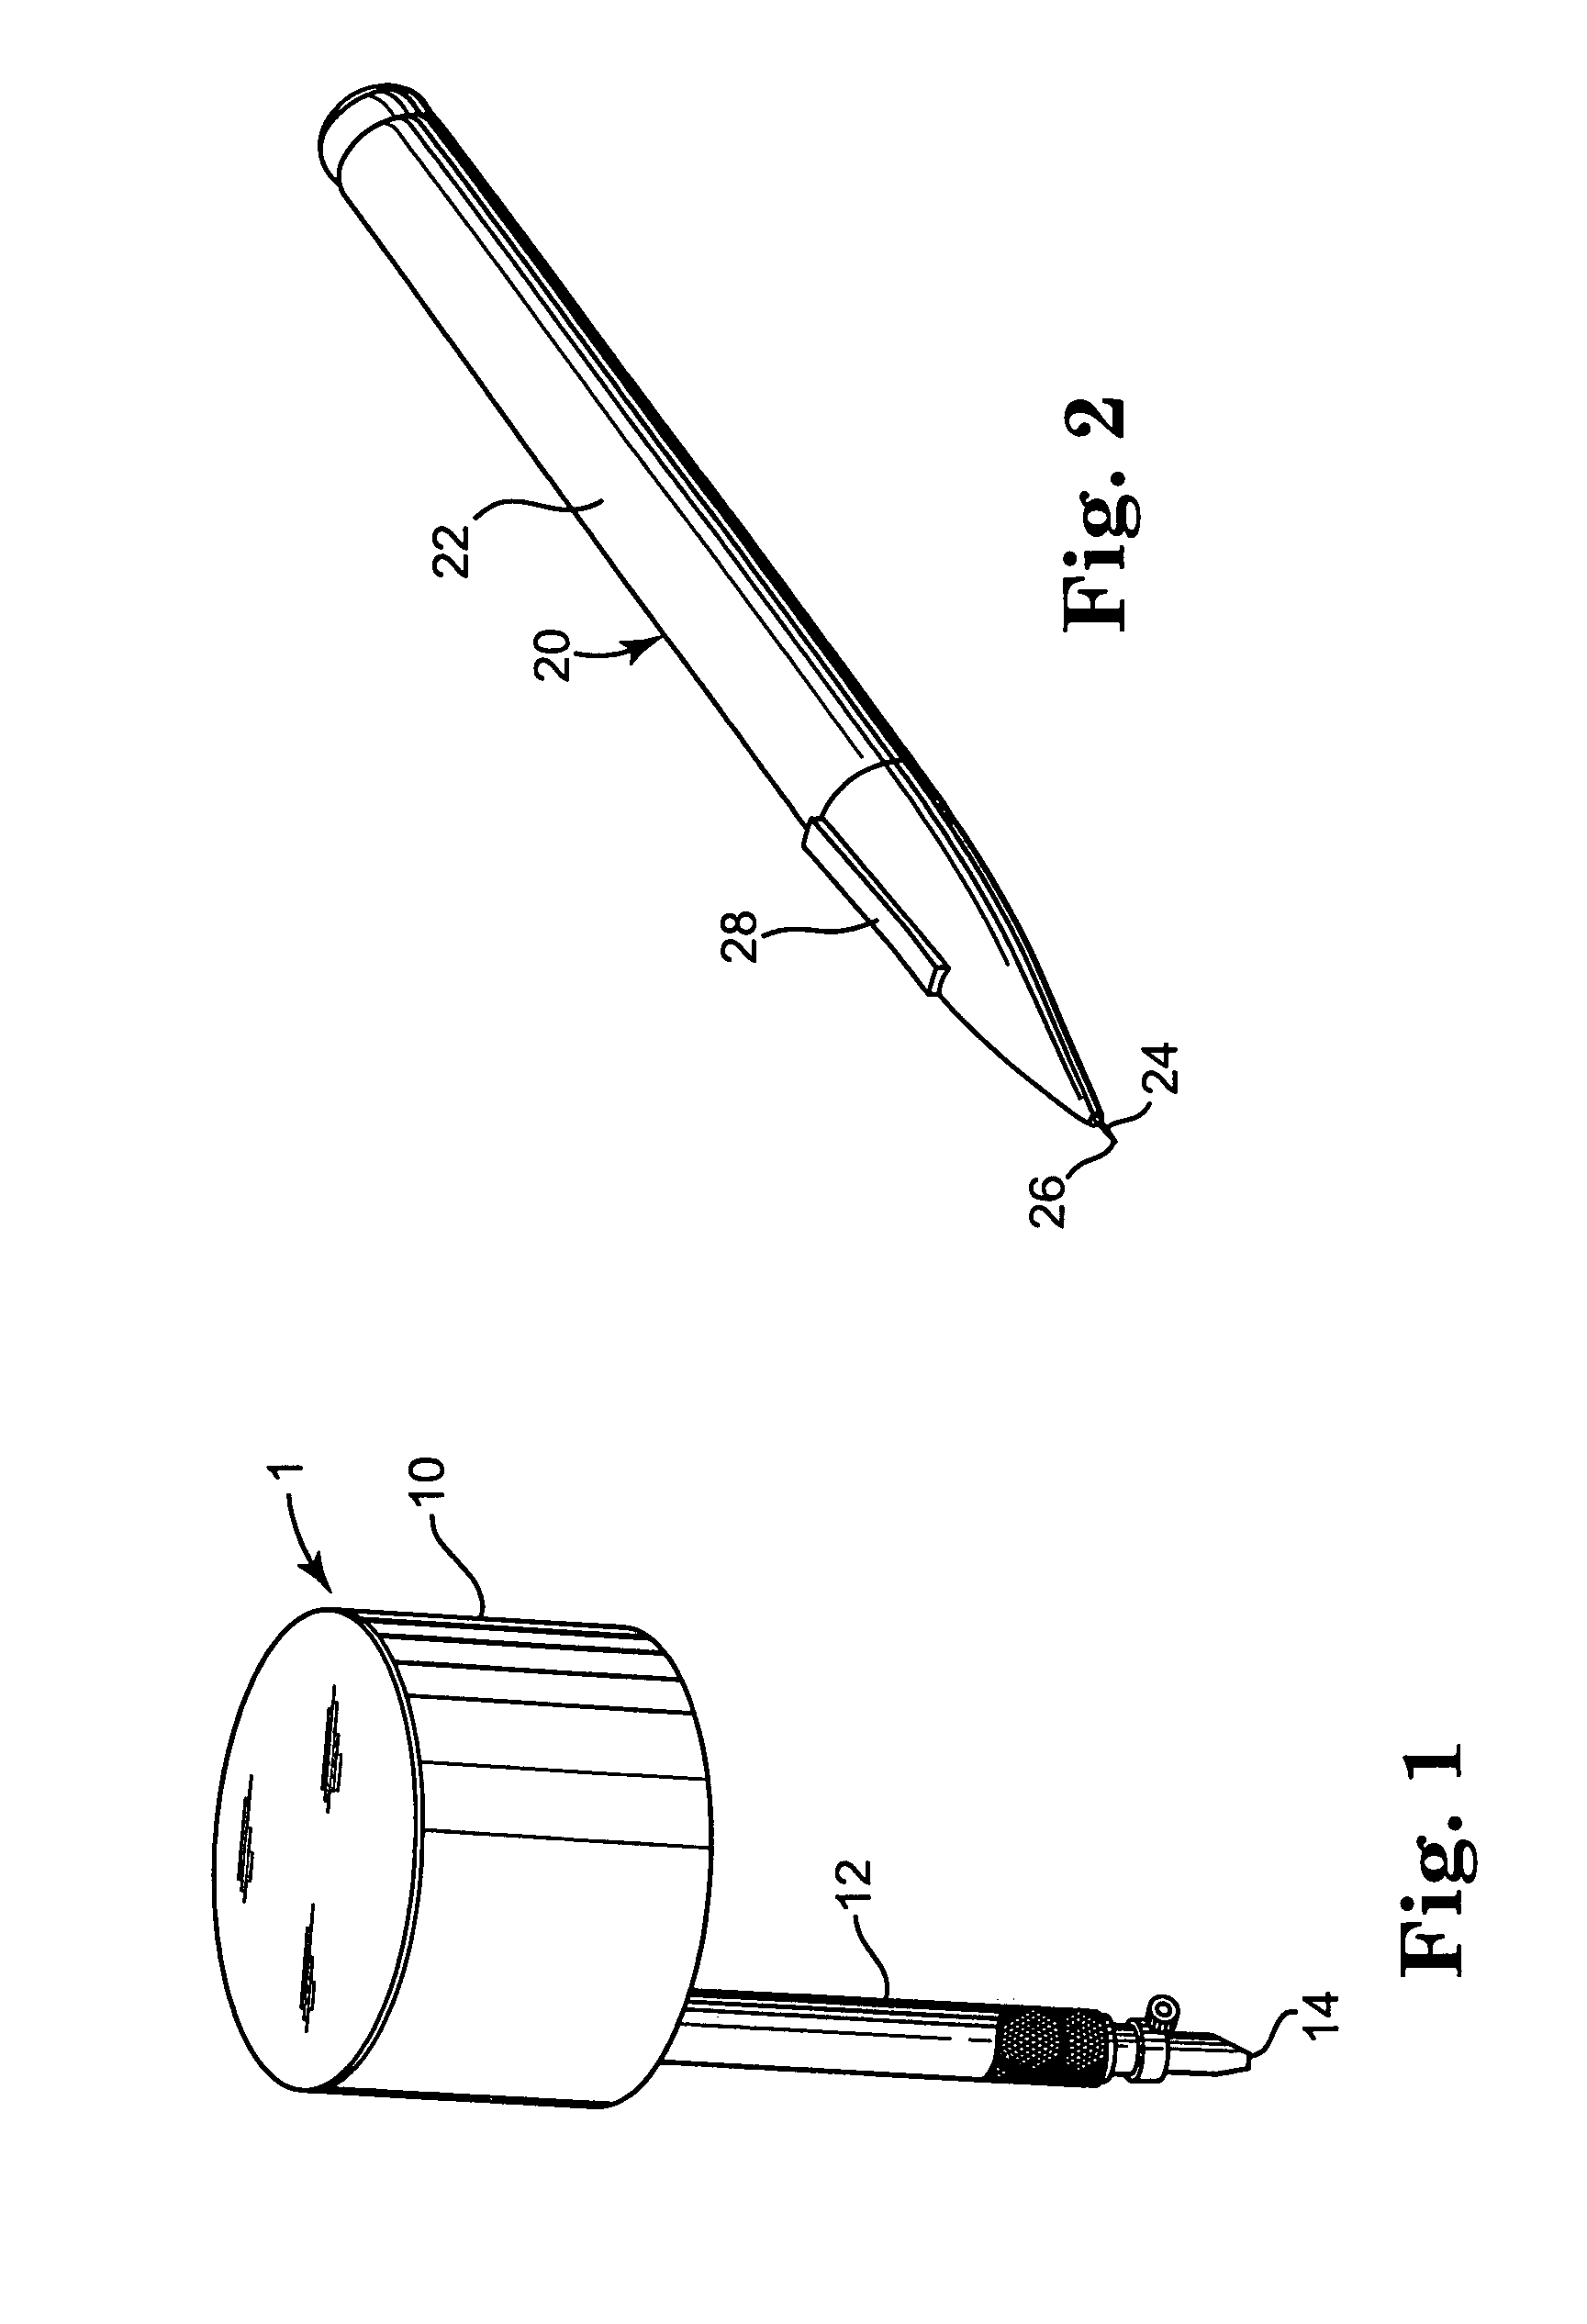 Device and method for ablation of cardiac tissue